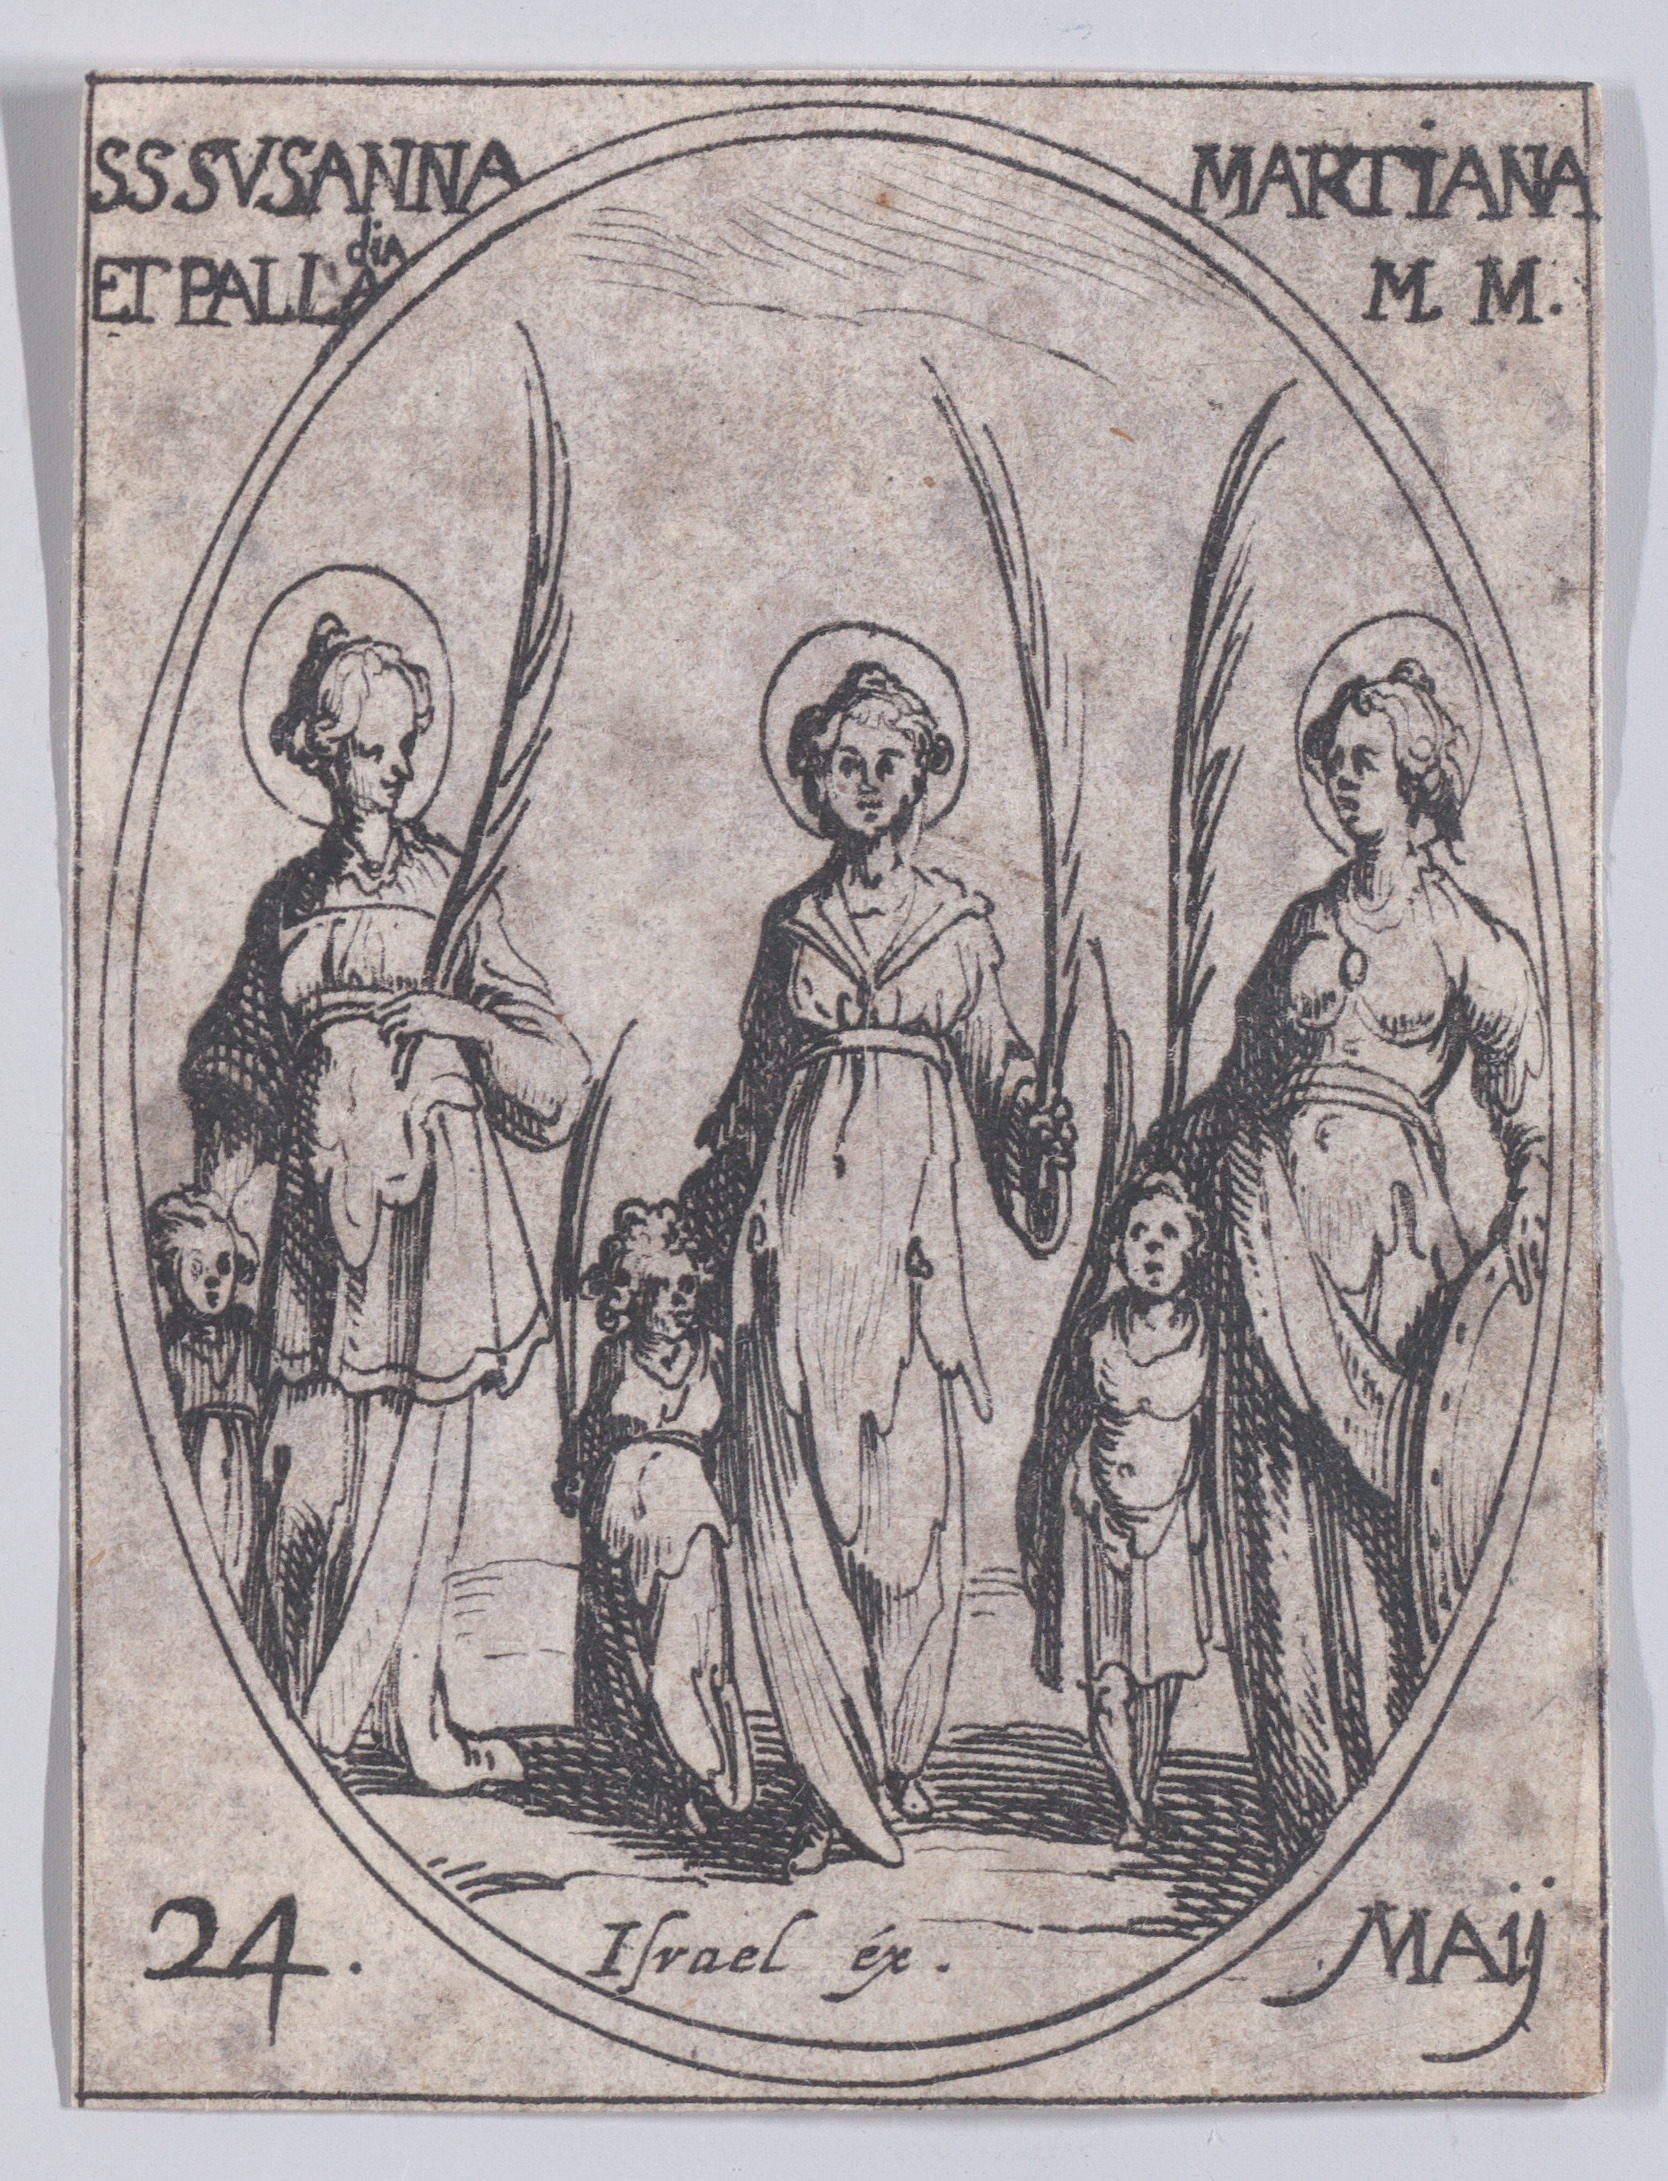 Ste. Suzanne, Ste. Marienne et Ste. Palladie (St. Susanna, St. Mariana, and St. Palladia), May 24th, from Les Images De Tous Les Saincts et Saintes de L'Année (Images of All of the Saints and Religious Events of the Year), Jacques Callot (French, Nancy 1592–1635 Nancy), Etching; second state of two (Lieure)